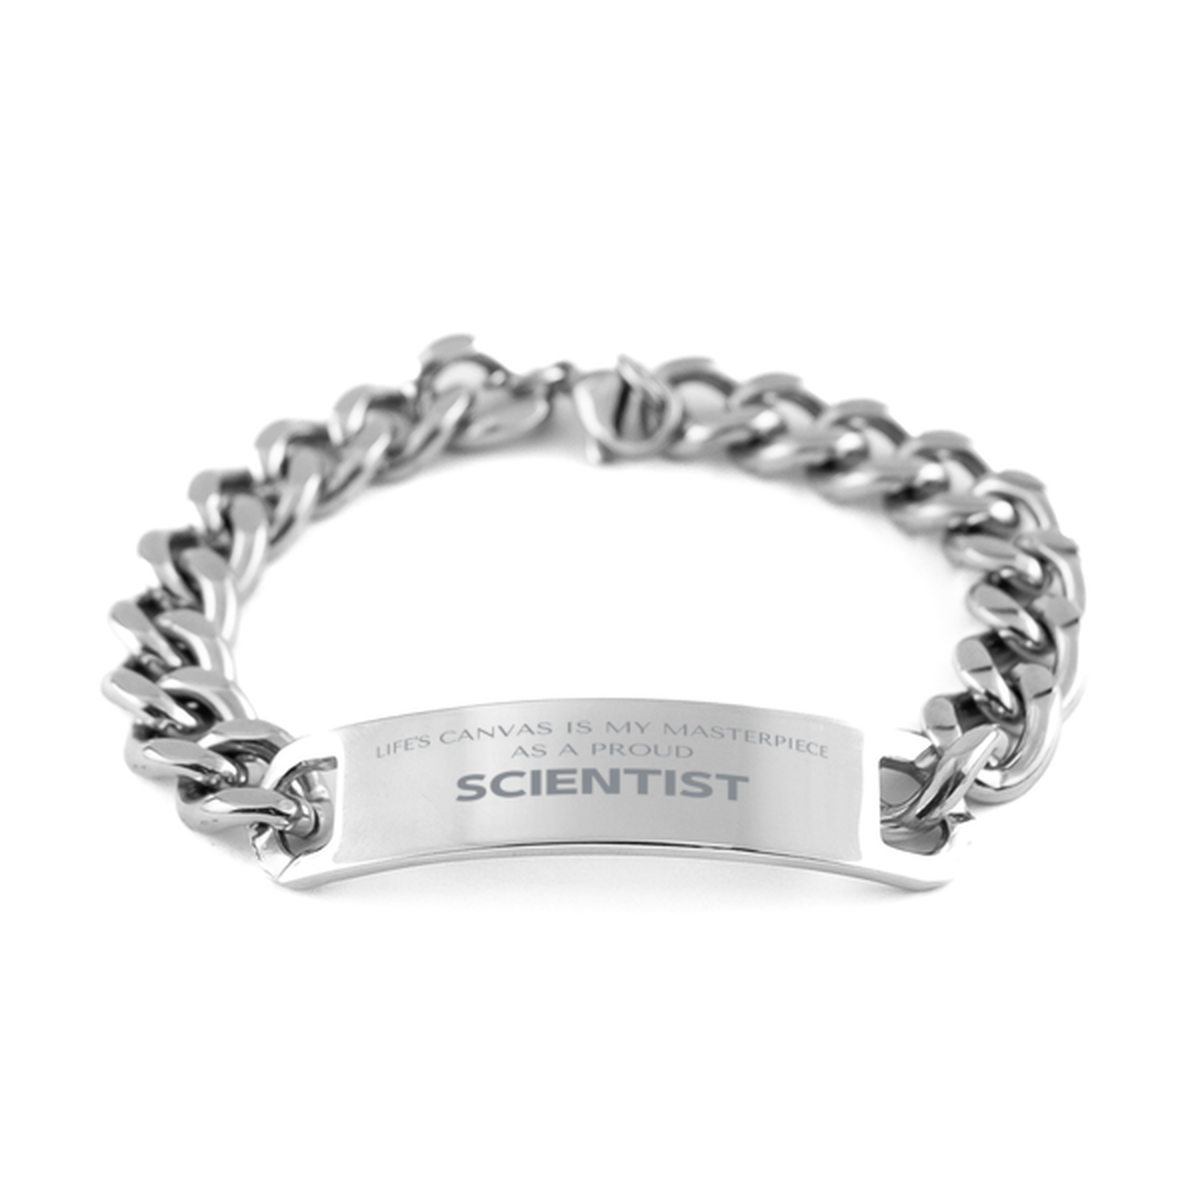 Proud Scientist Gifts, Life's canvas is my masterpiece, Epic Birthday Christmas Unique Cuban Chain Stainless Steel Bracelet For Scientist, Coworkers, Men, Women, Friends